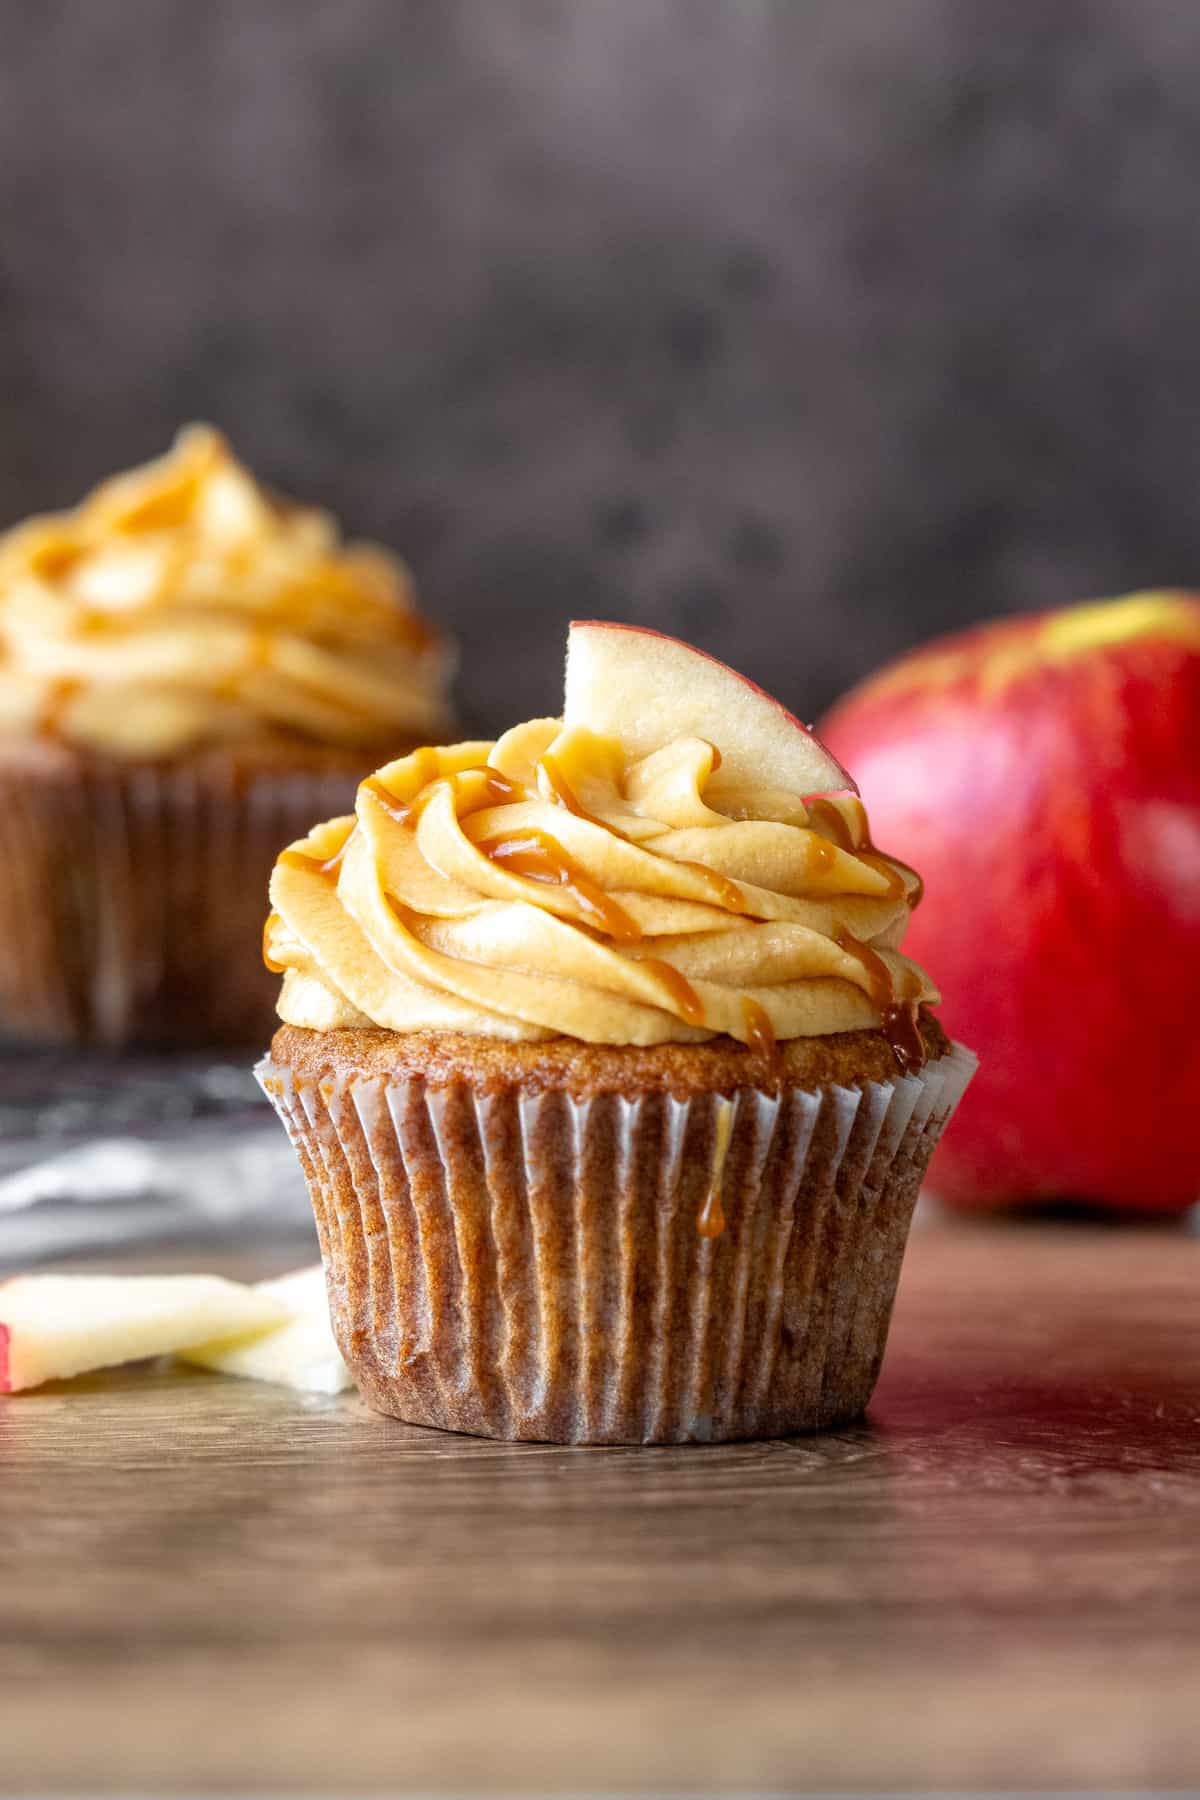 Apple cupcake topped with salted caramel frosting, a drizzle of caramel and a slice of apple